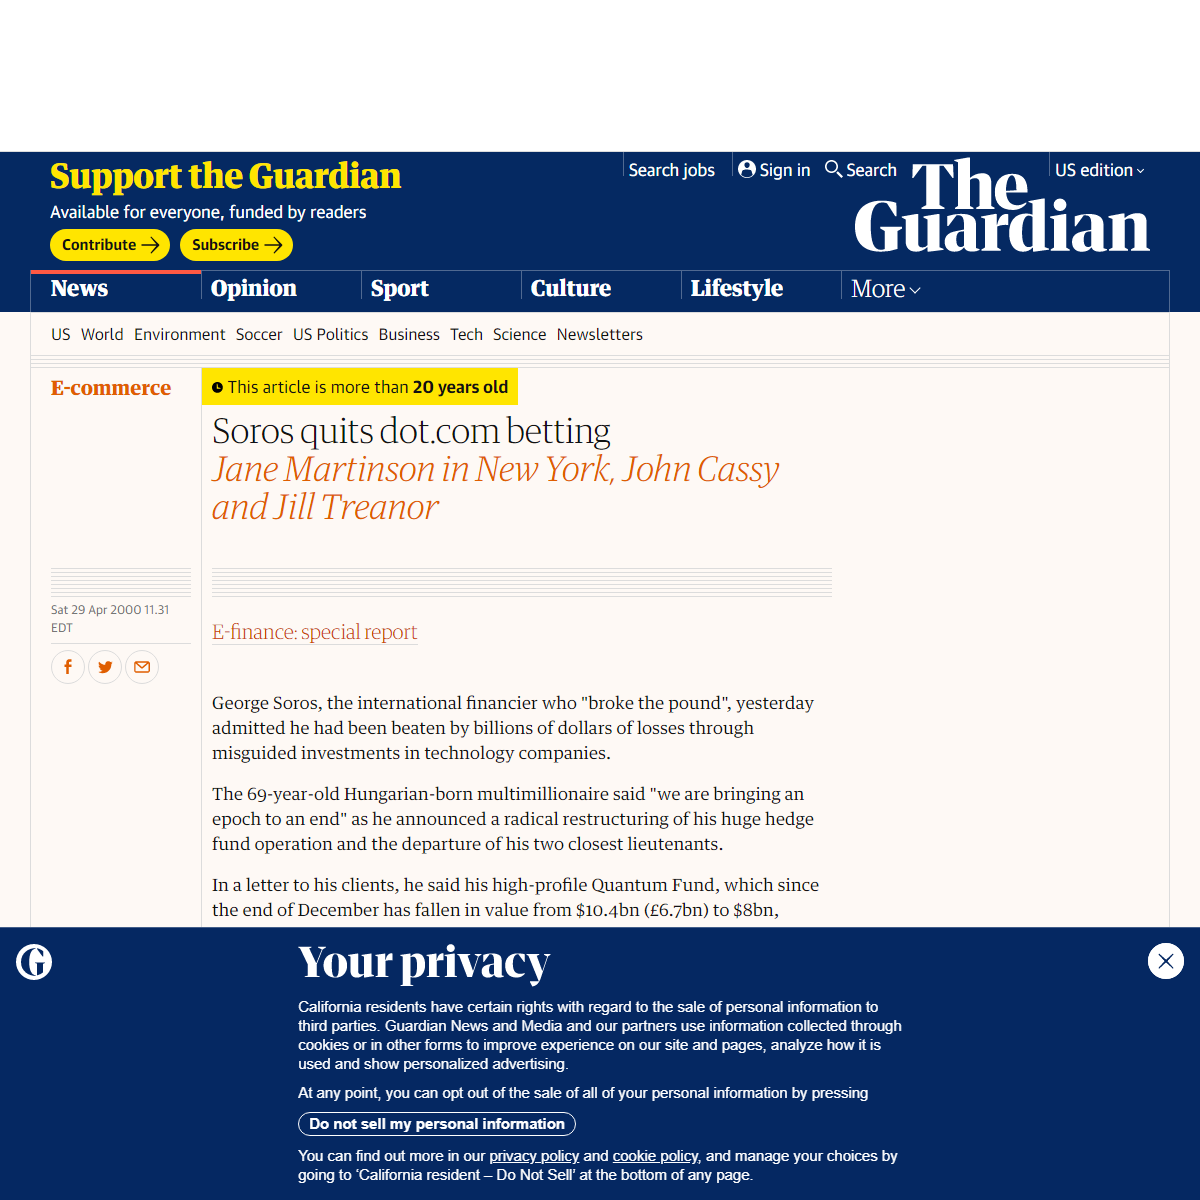 A complete backup of https://www.theguardian.com/technology/2000/apr/29/efinance.business